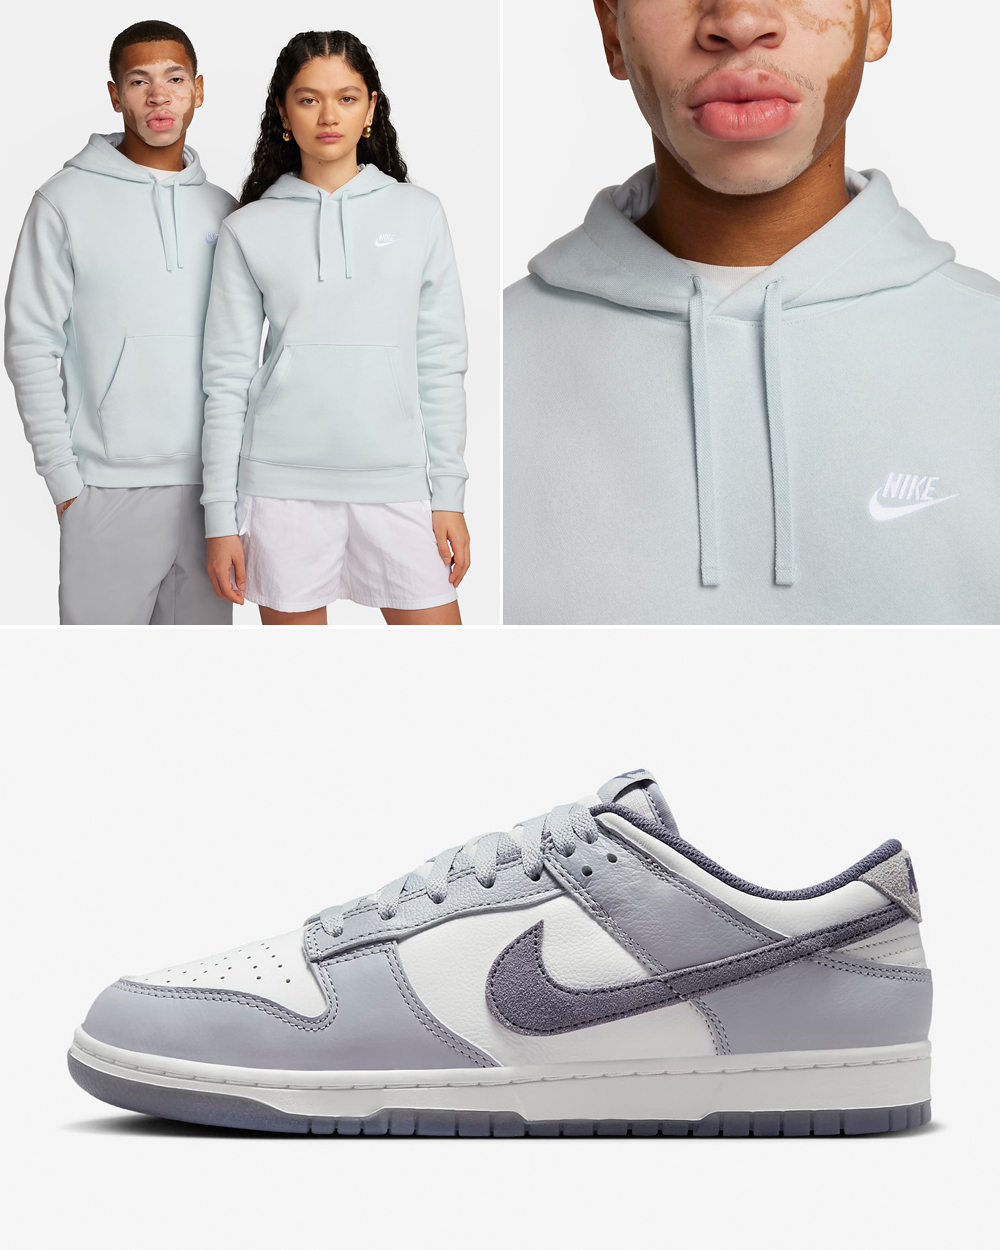 Nike-Dunk-Low-Light-Carbon-Hoodie-Outfit